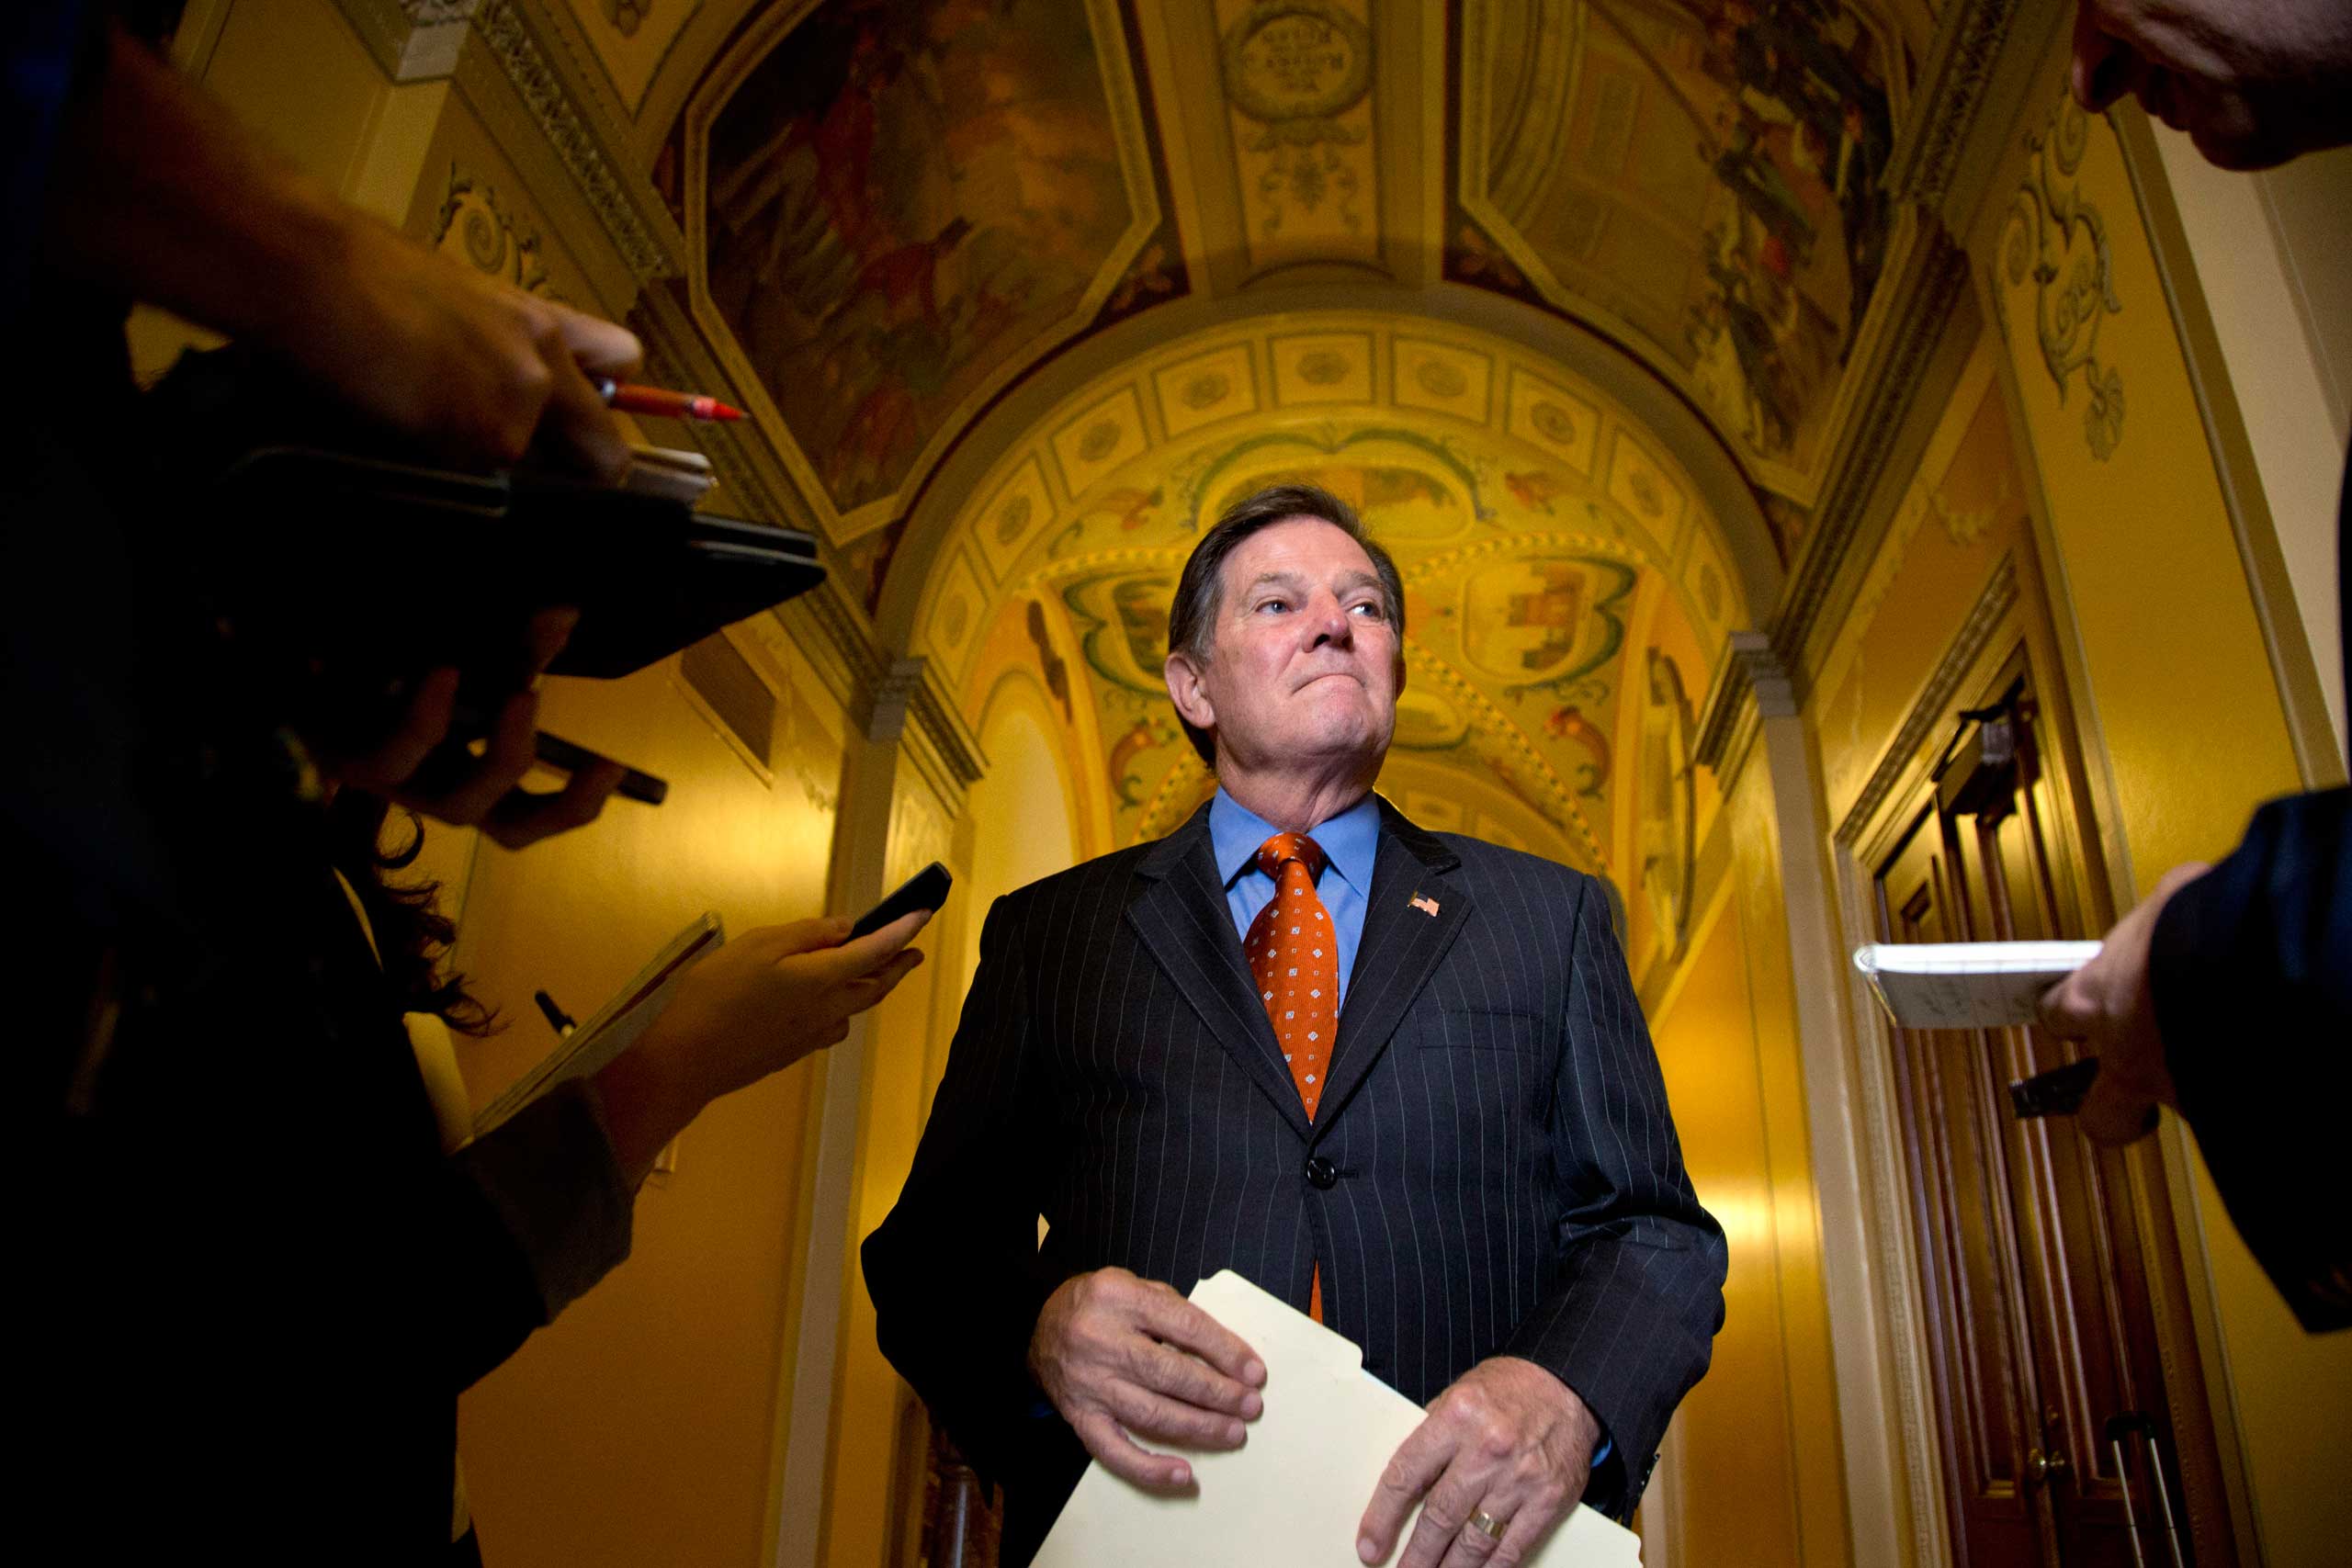 Rep. Tom DeLay (R-Tx.) stepped down from his post as House majority leader in 2005 when a Texas grand jury indicted him on a conspiracy charge in his management of campaign finances. His corruption conviction was overturned in October.